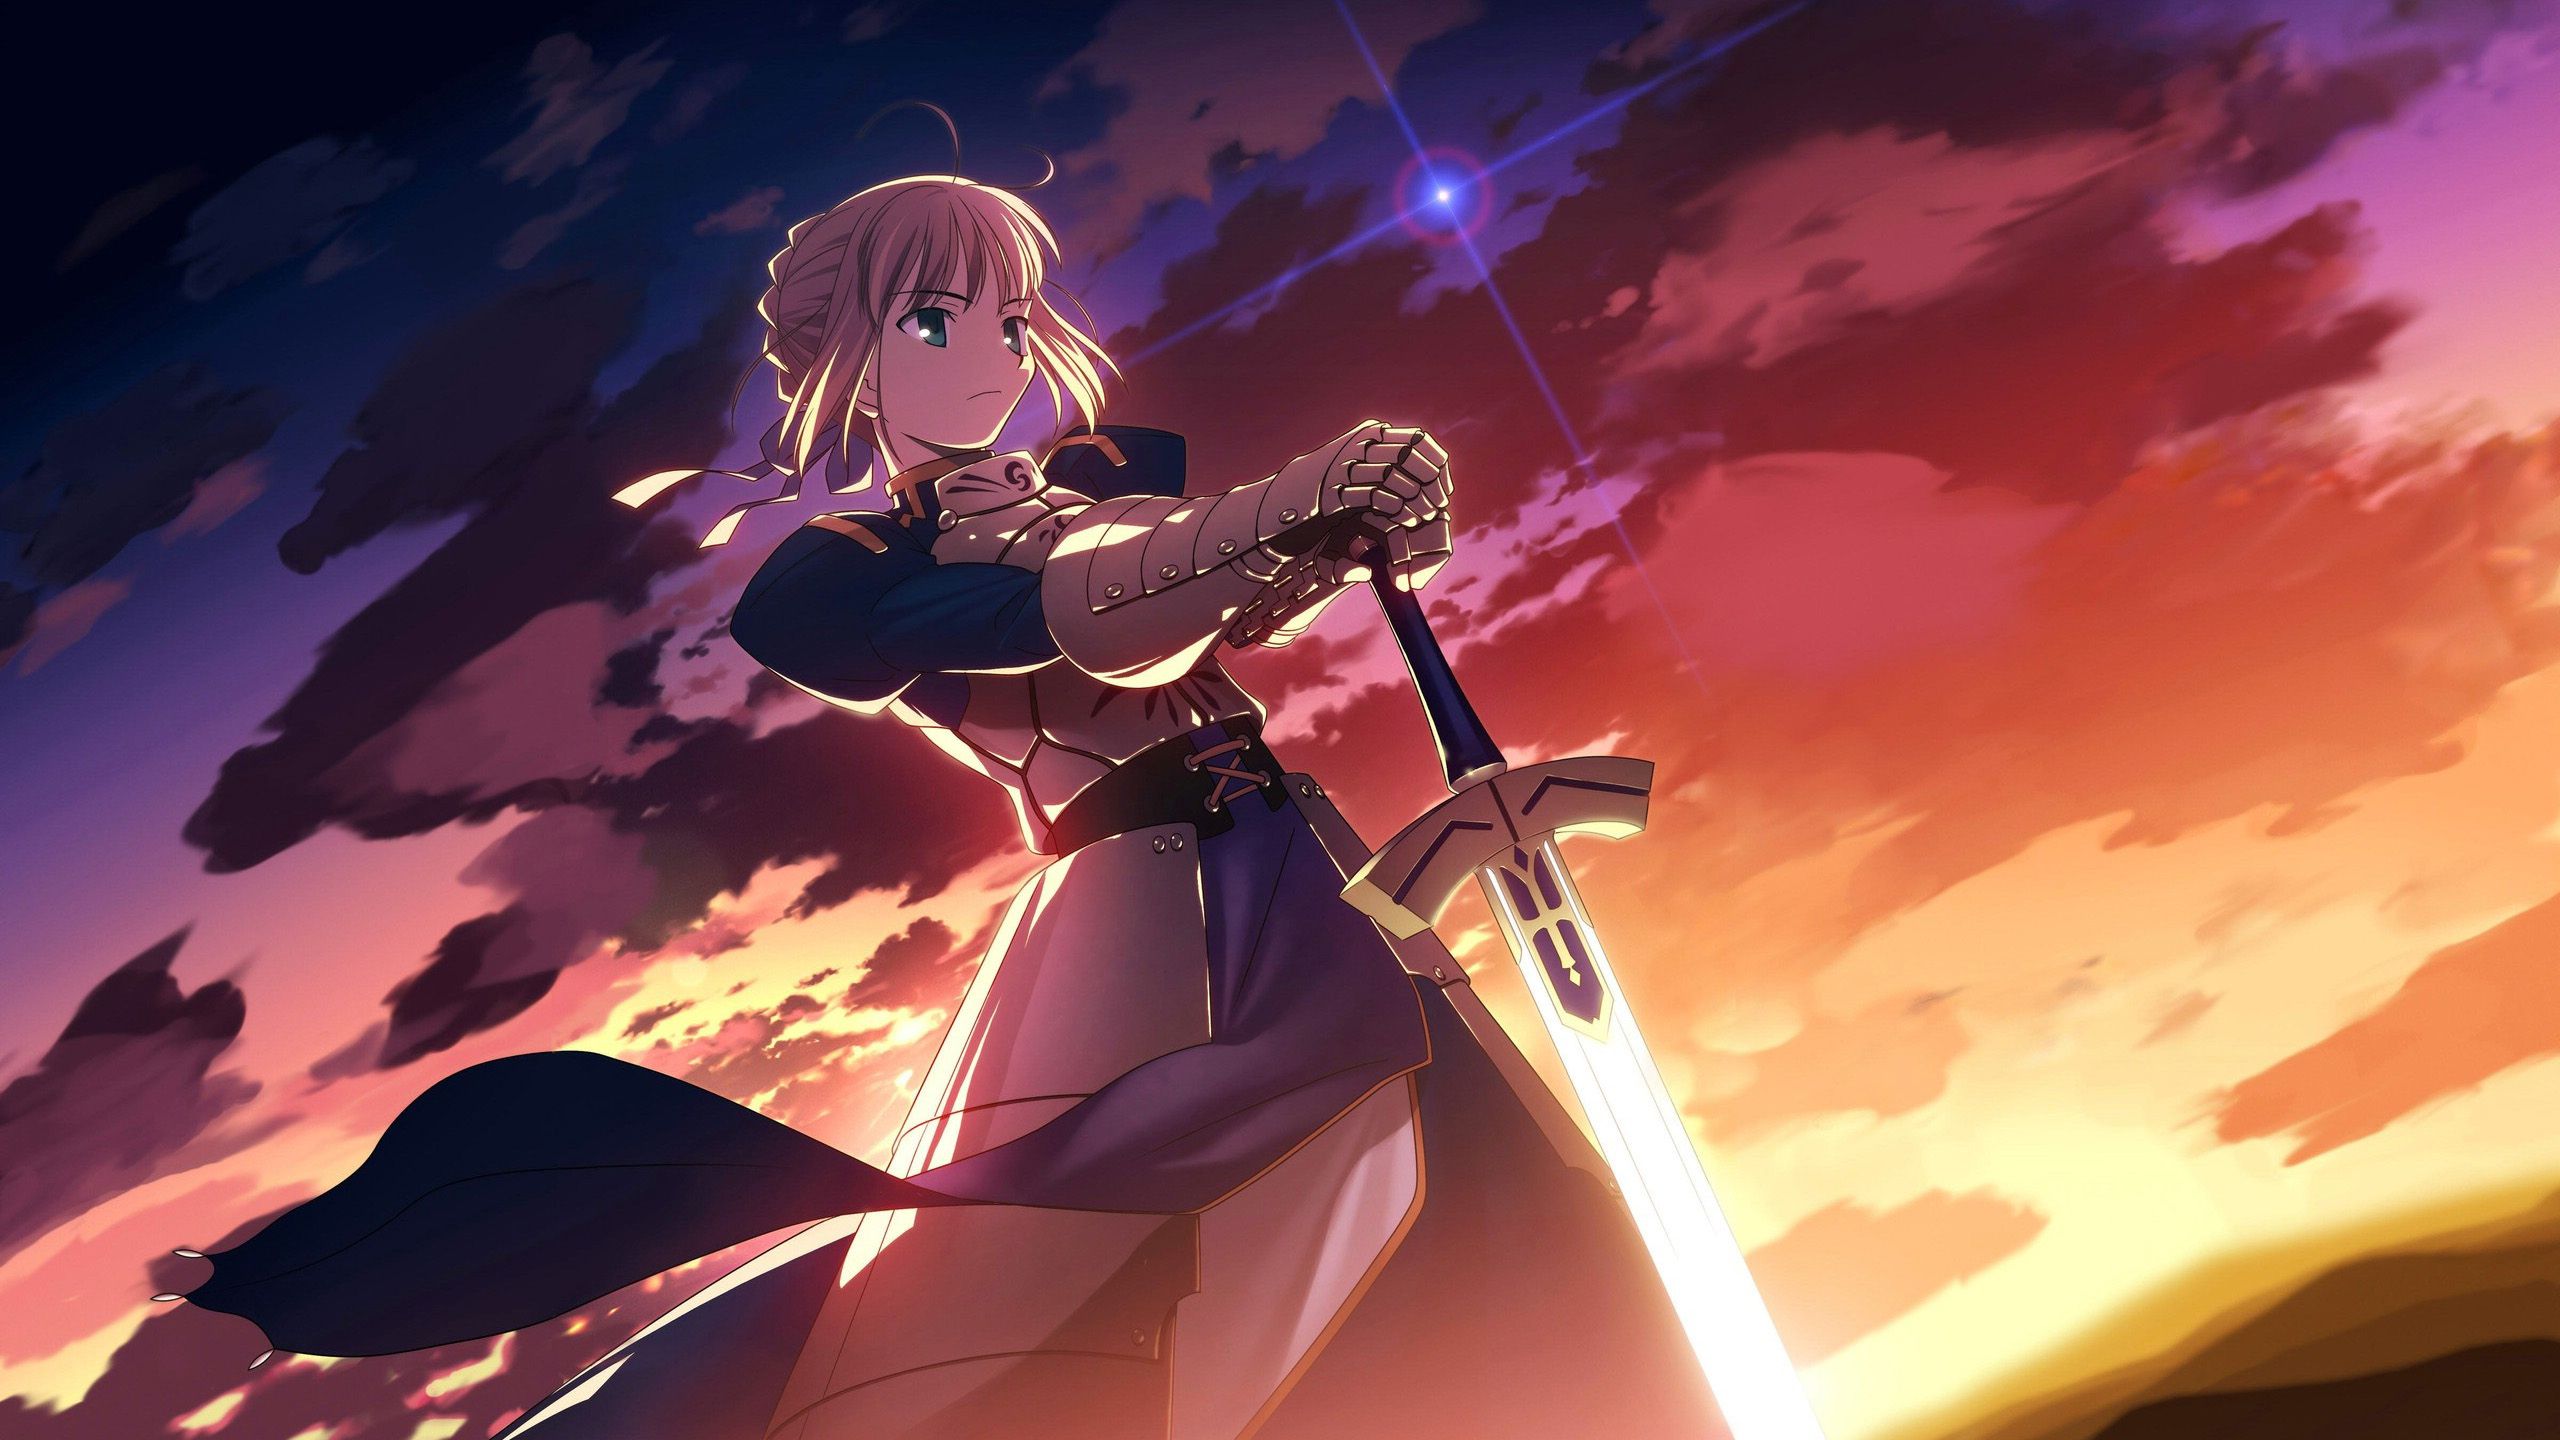 Fate Stay Night. Fate stay night anime, Cool anime wallpaper, Fate stay night